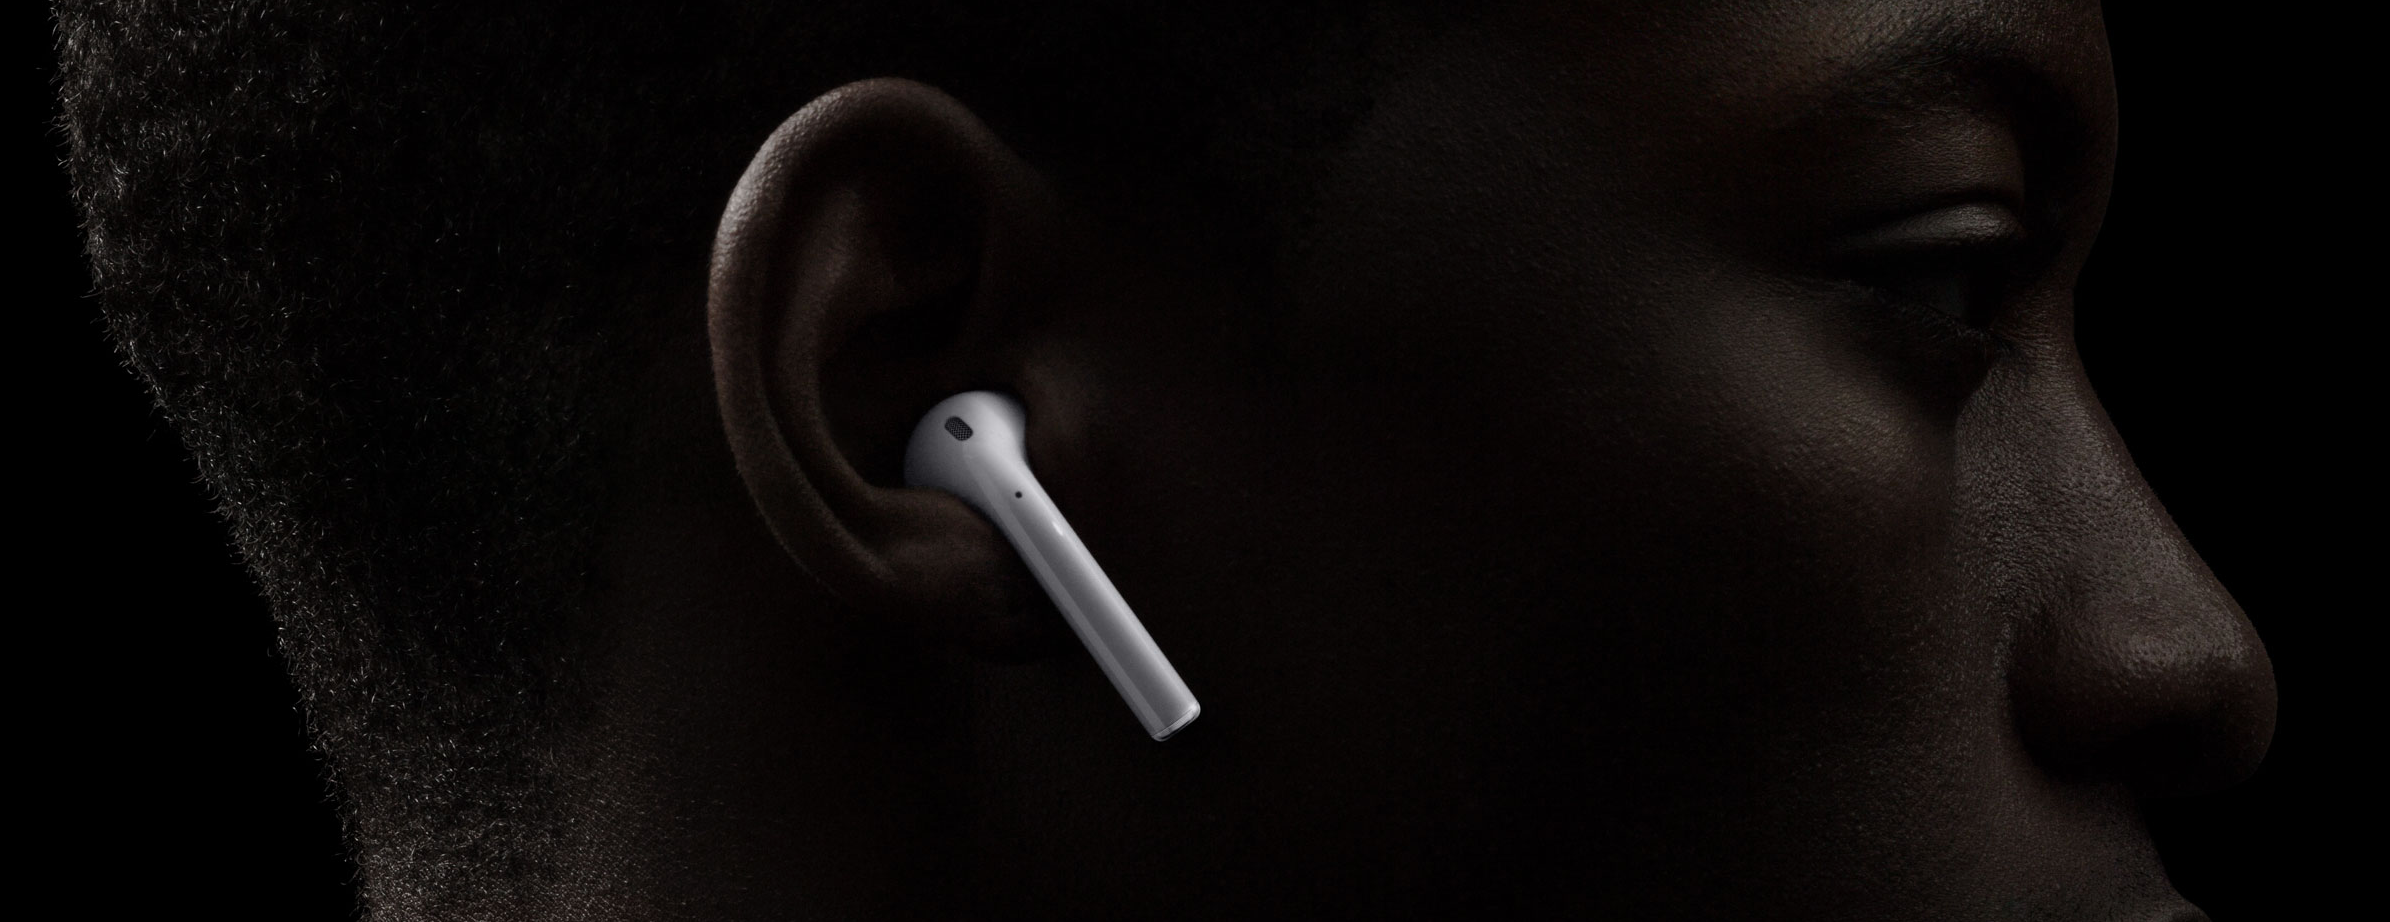 How to Use AirPods as Hearing Aids